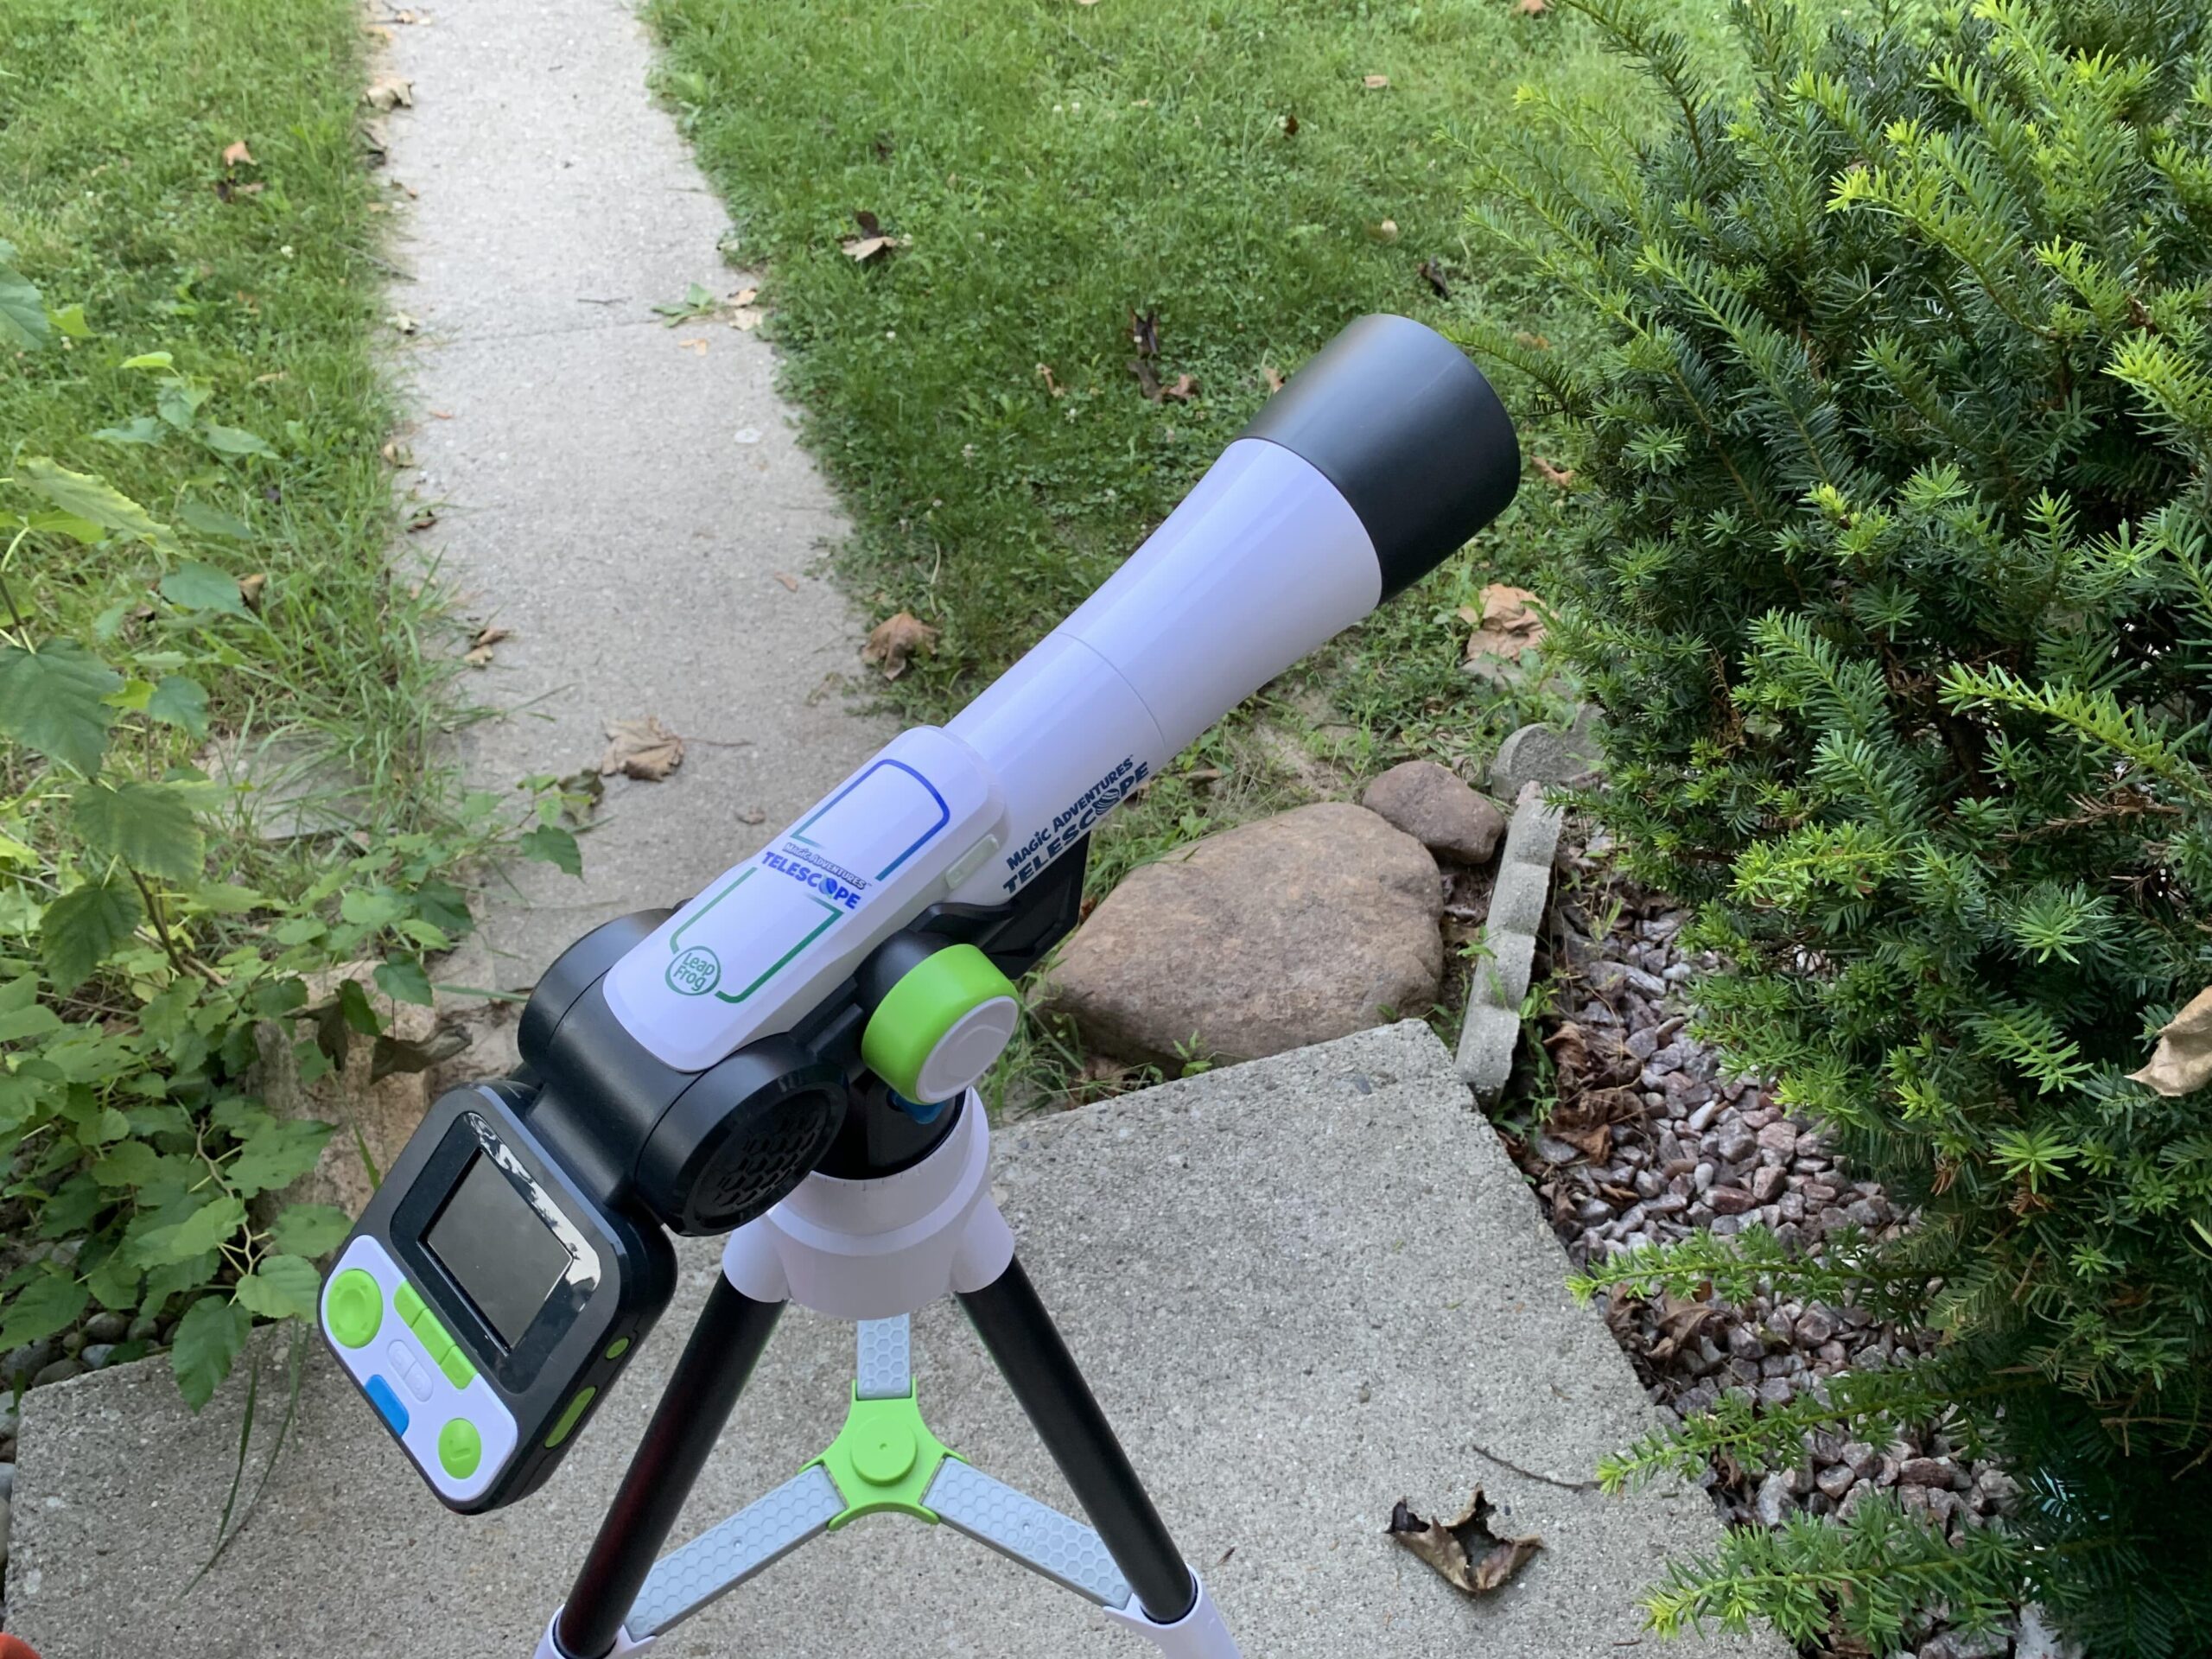 LeapFrog Magic Adventures Telescope Selected as Esteemed Toy of